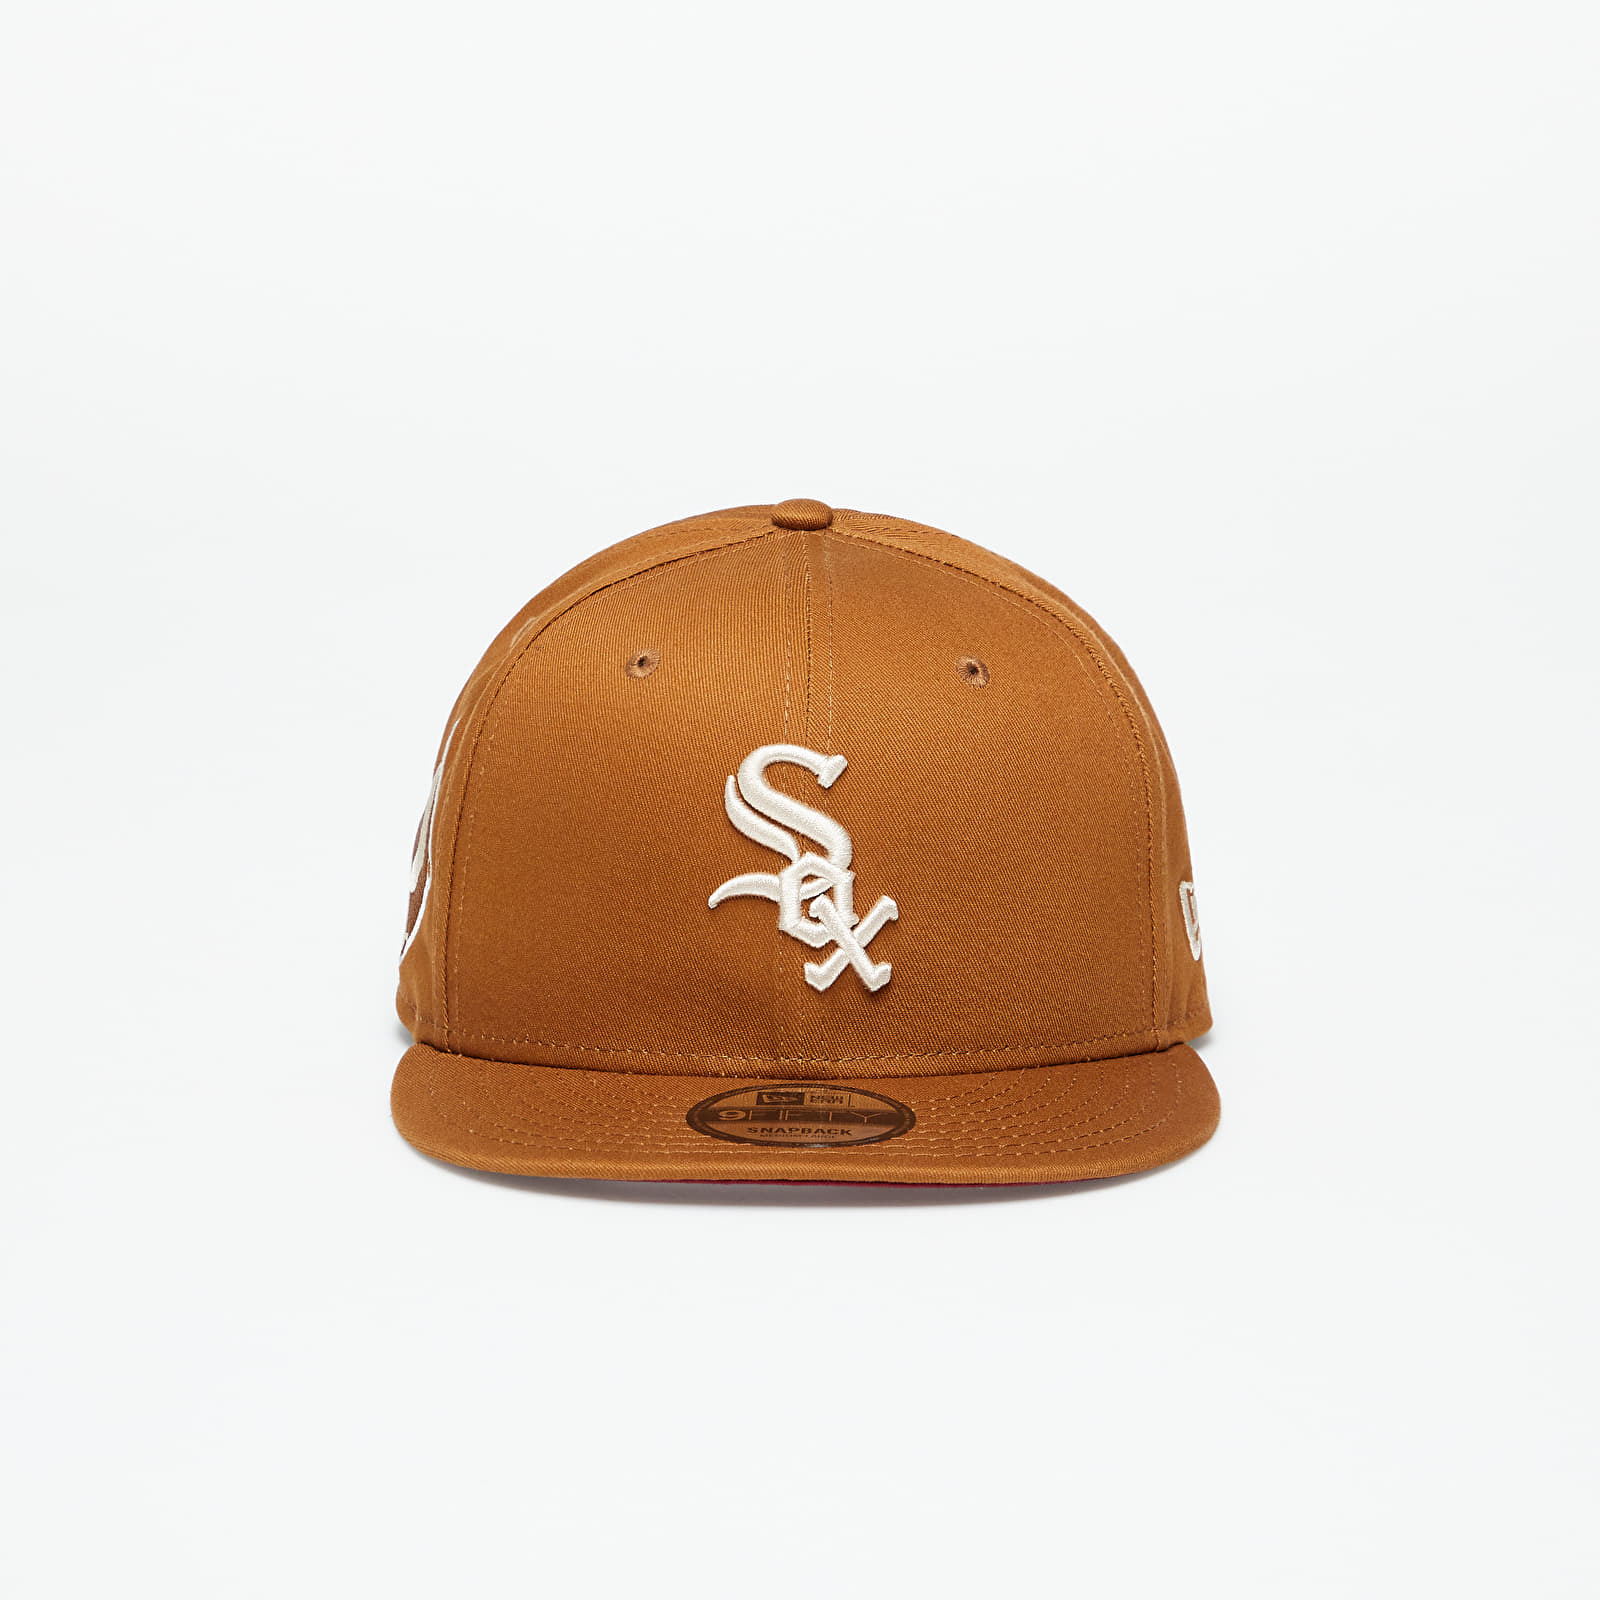 New Era - chicago white sox side patch 9fifty snapback cap toasted peanut/ stone